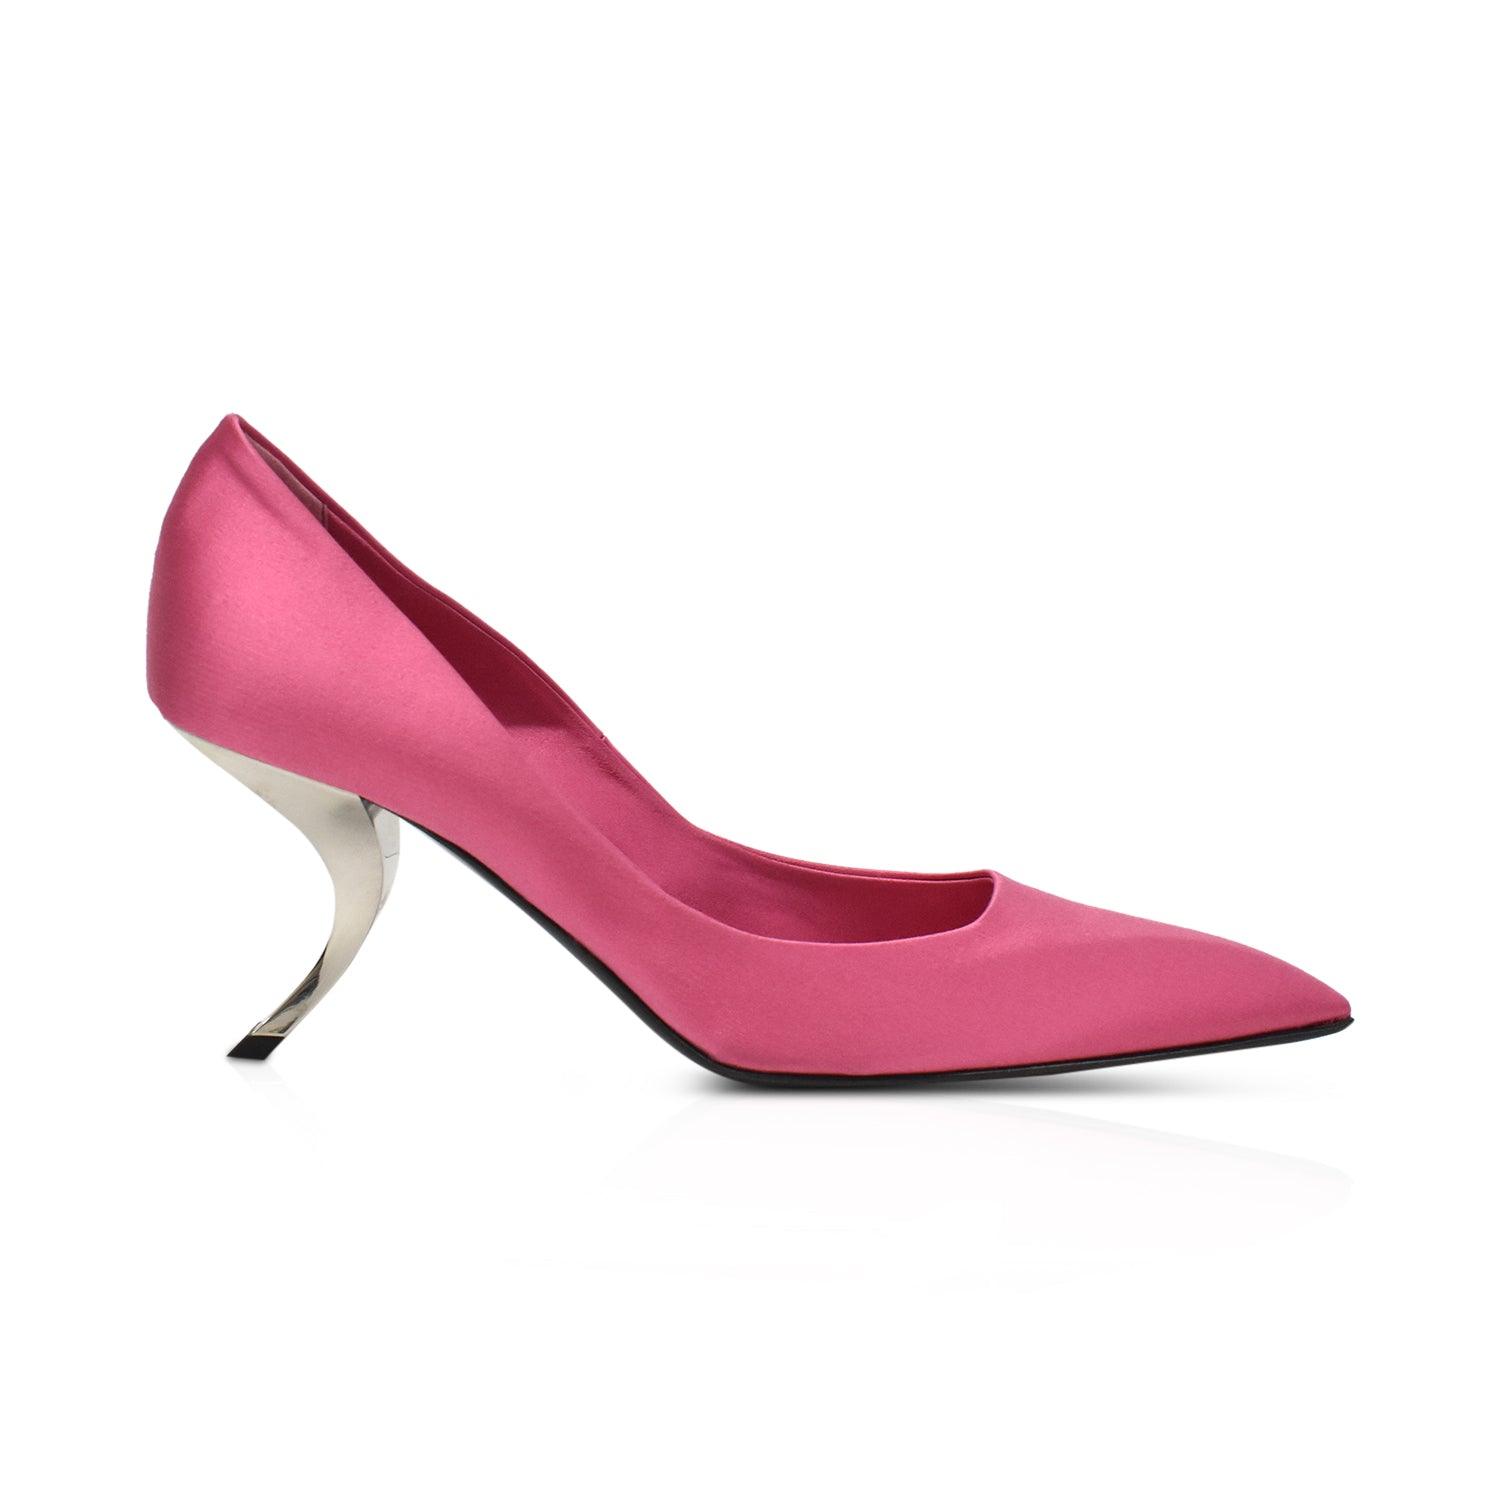 Roger Vivier Pumps - Women's 8 - Fashionably Yours